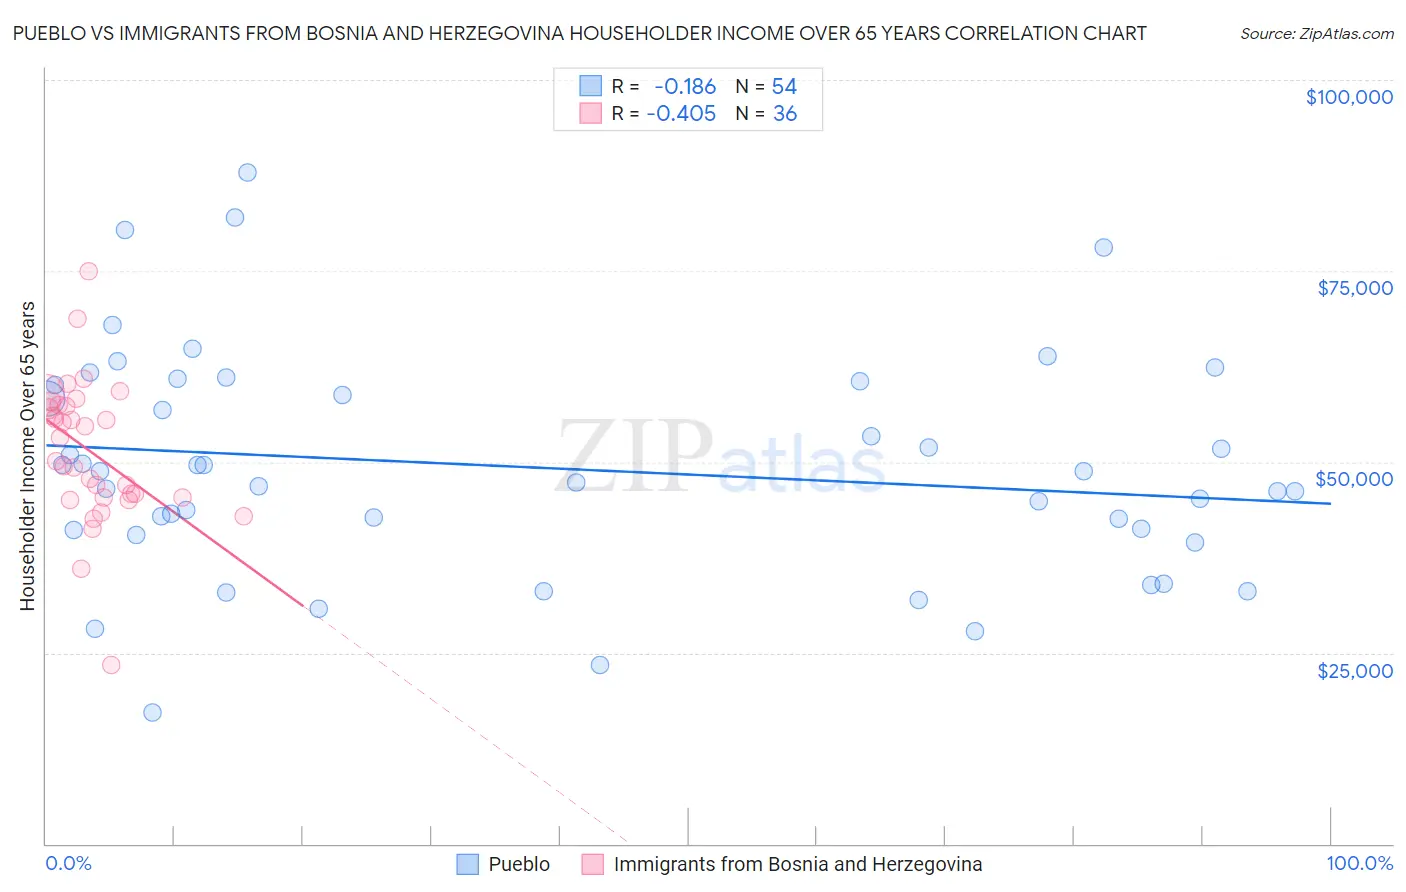 Pueblo vs Immigrants from Bosnia and Herzegovina Householder Income Over 65 years